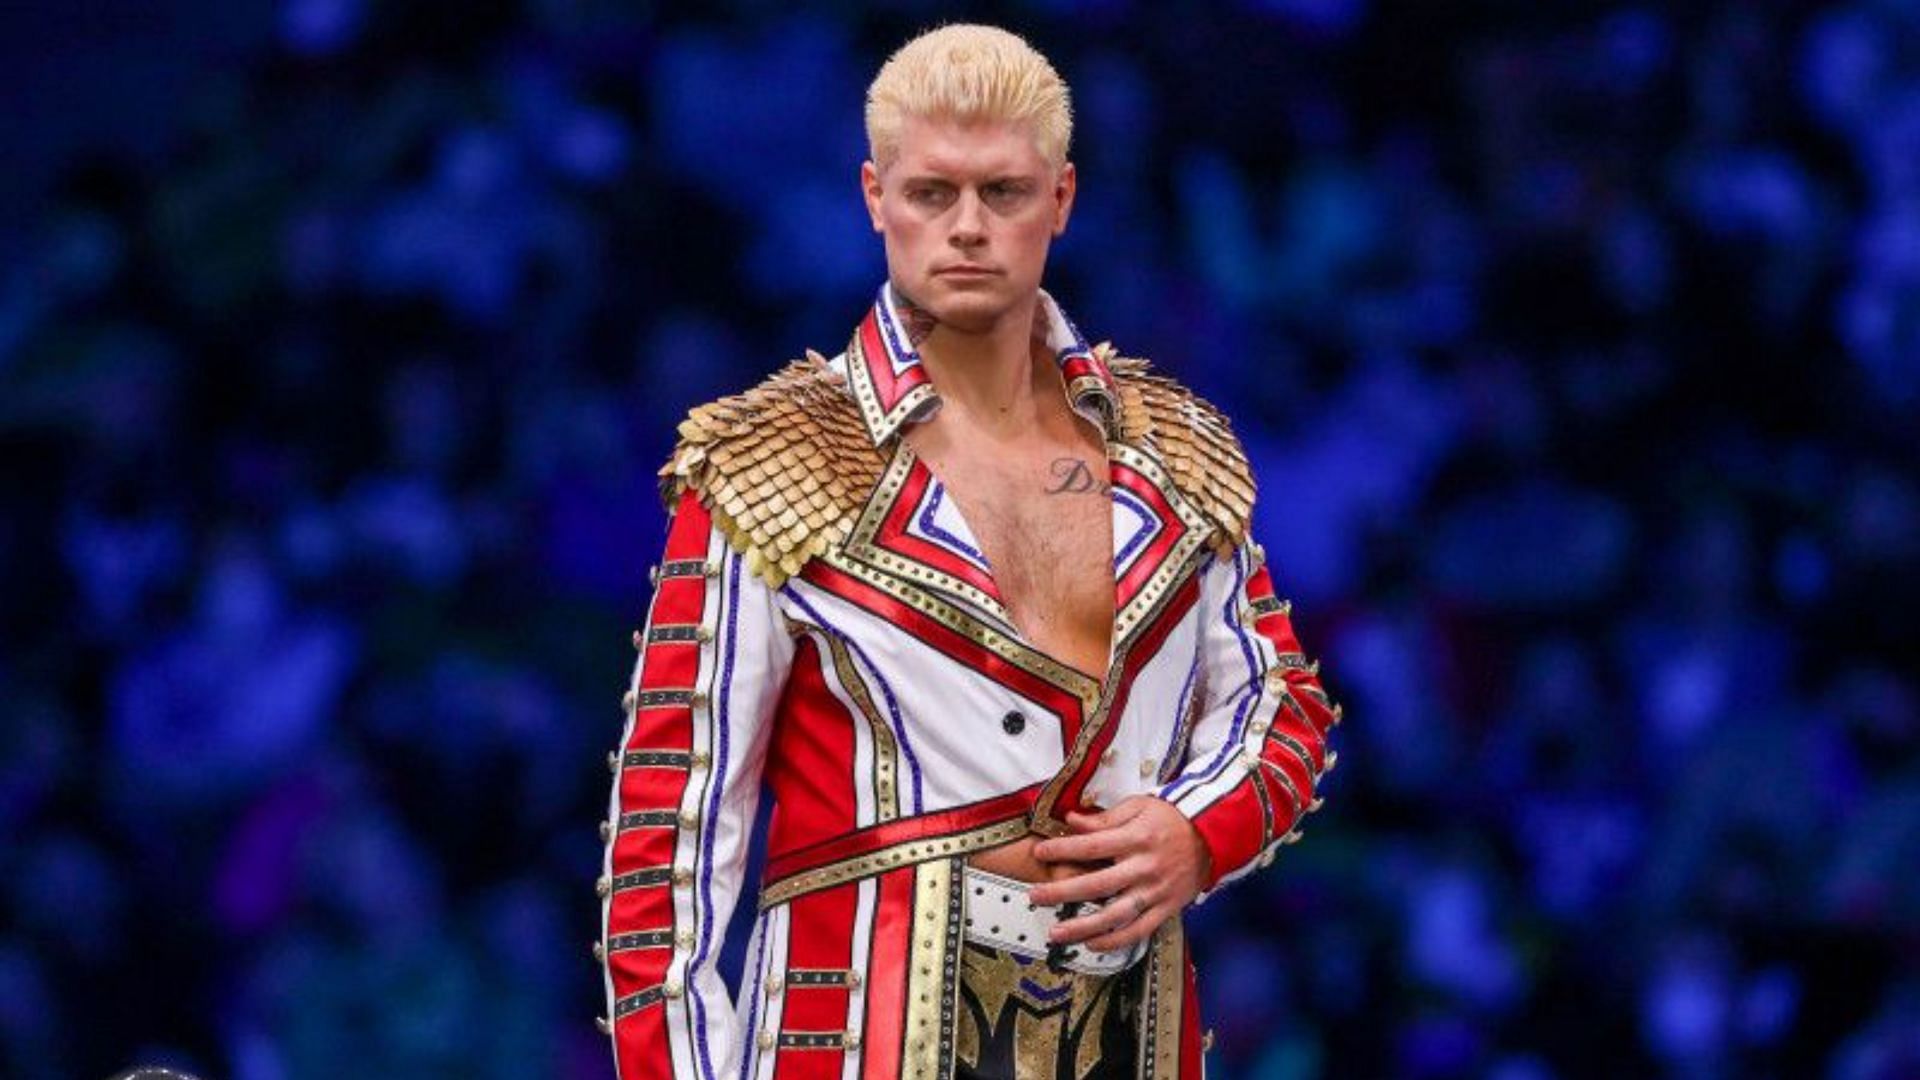 Cody Rhodes is currently out of action due to injury